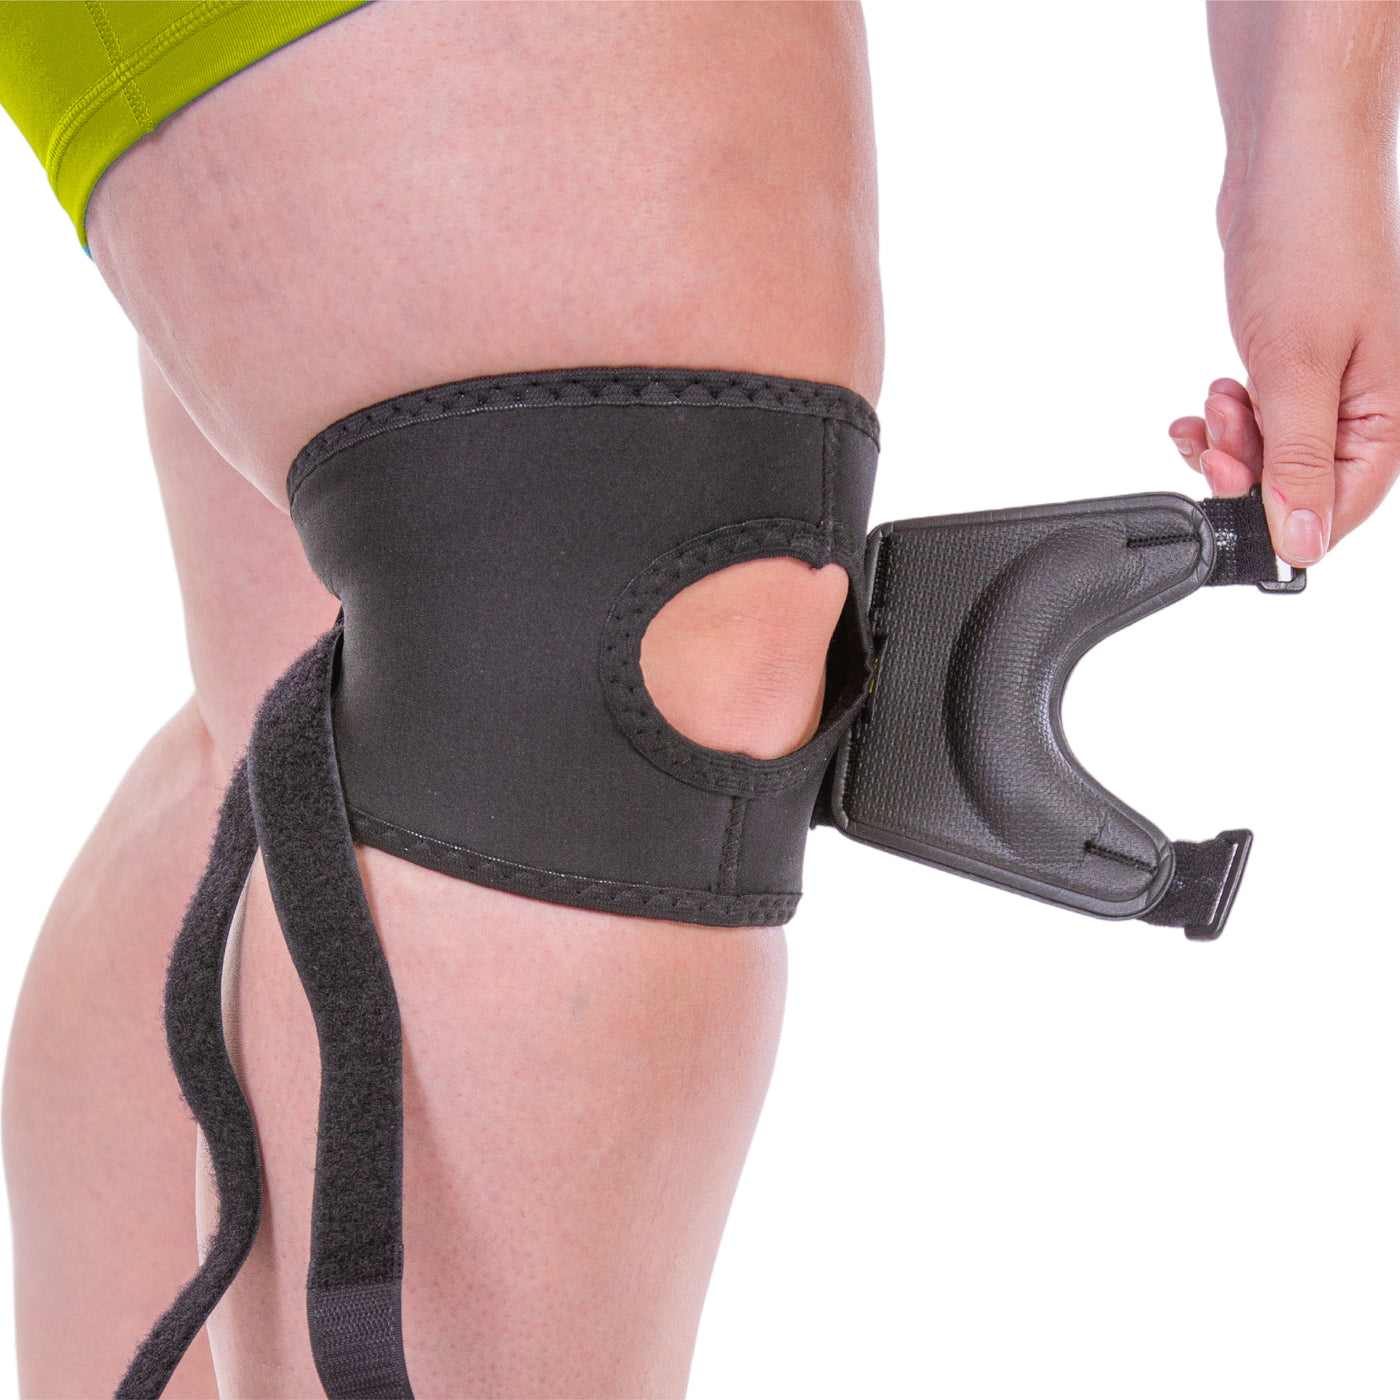 Plus size XXL knee brace for patella support for working out, walking and exercising with excess knee fat